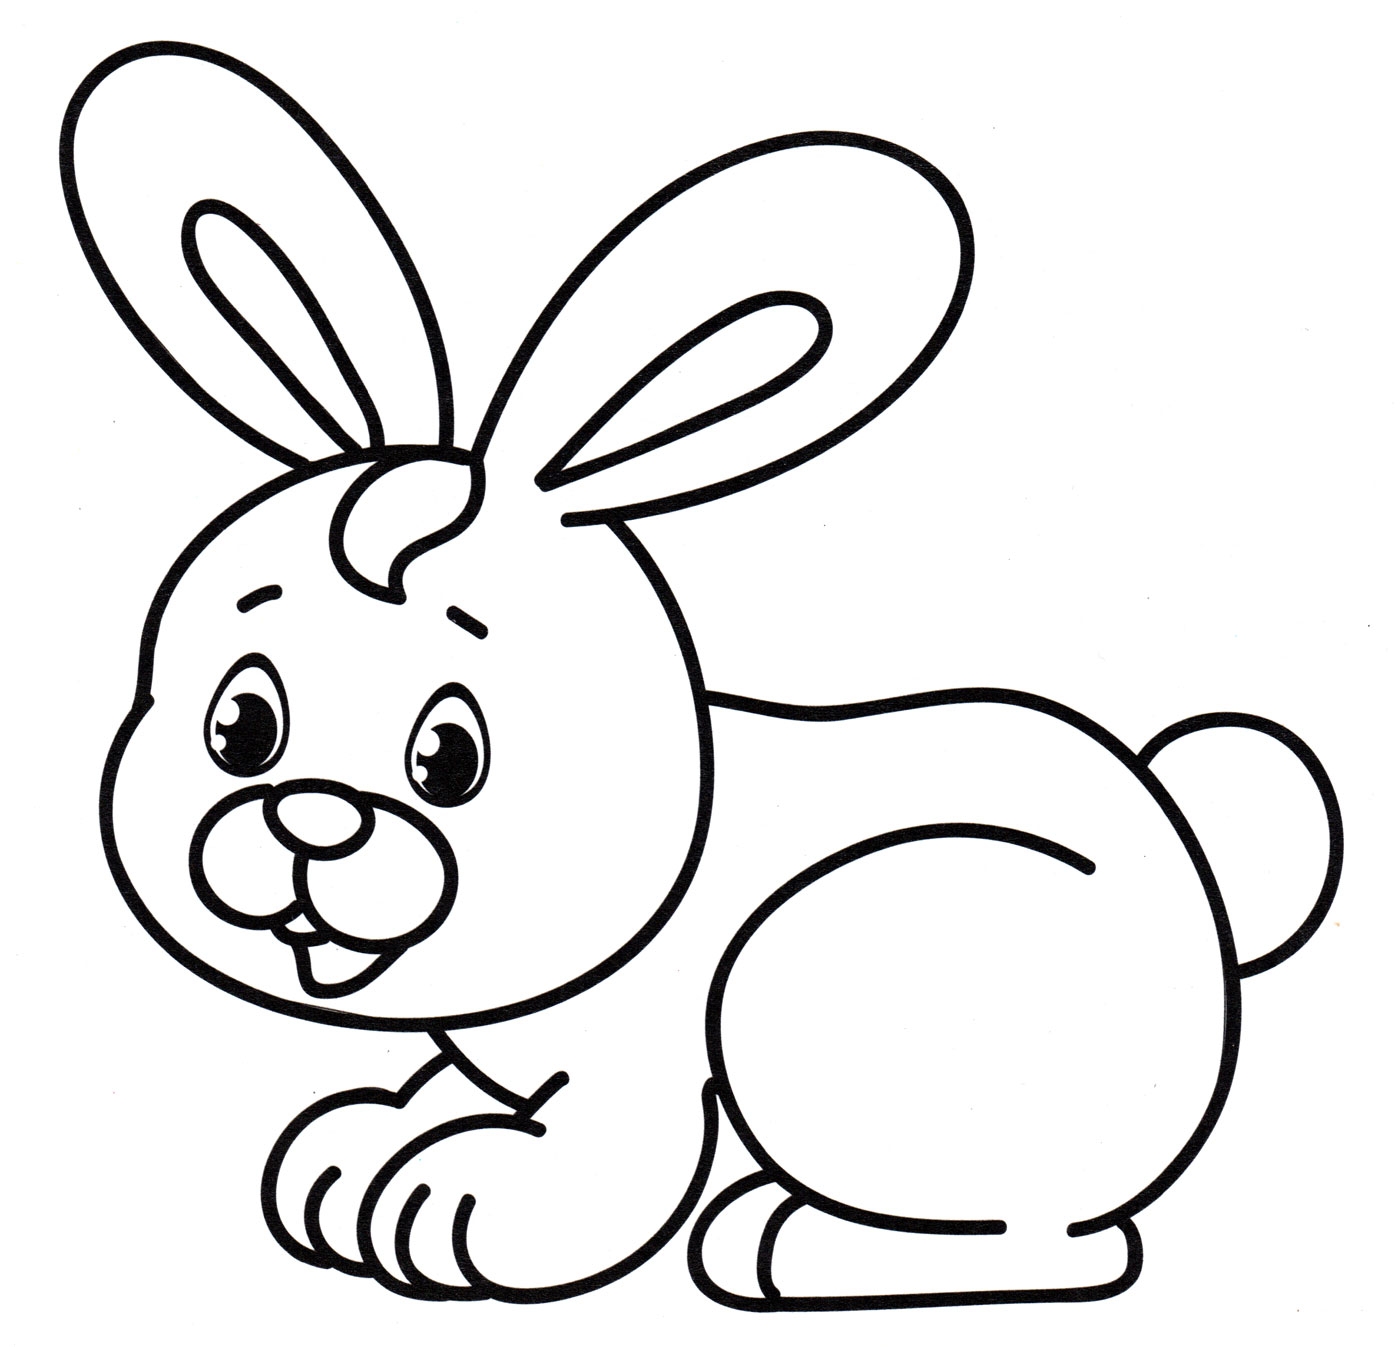 Bunny for children 4 5 years old #5